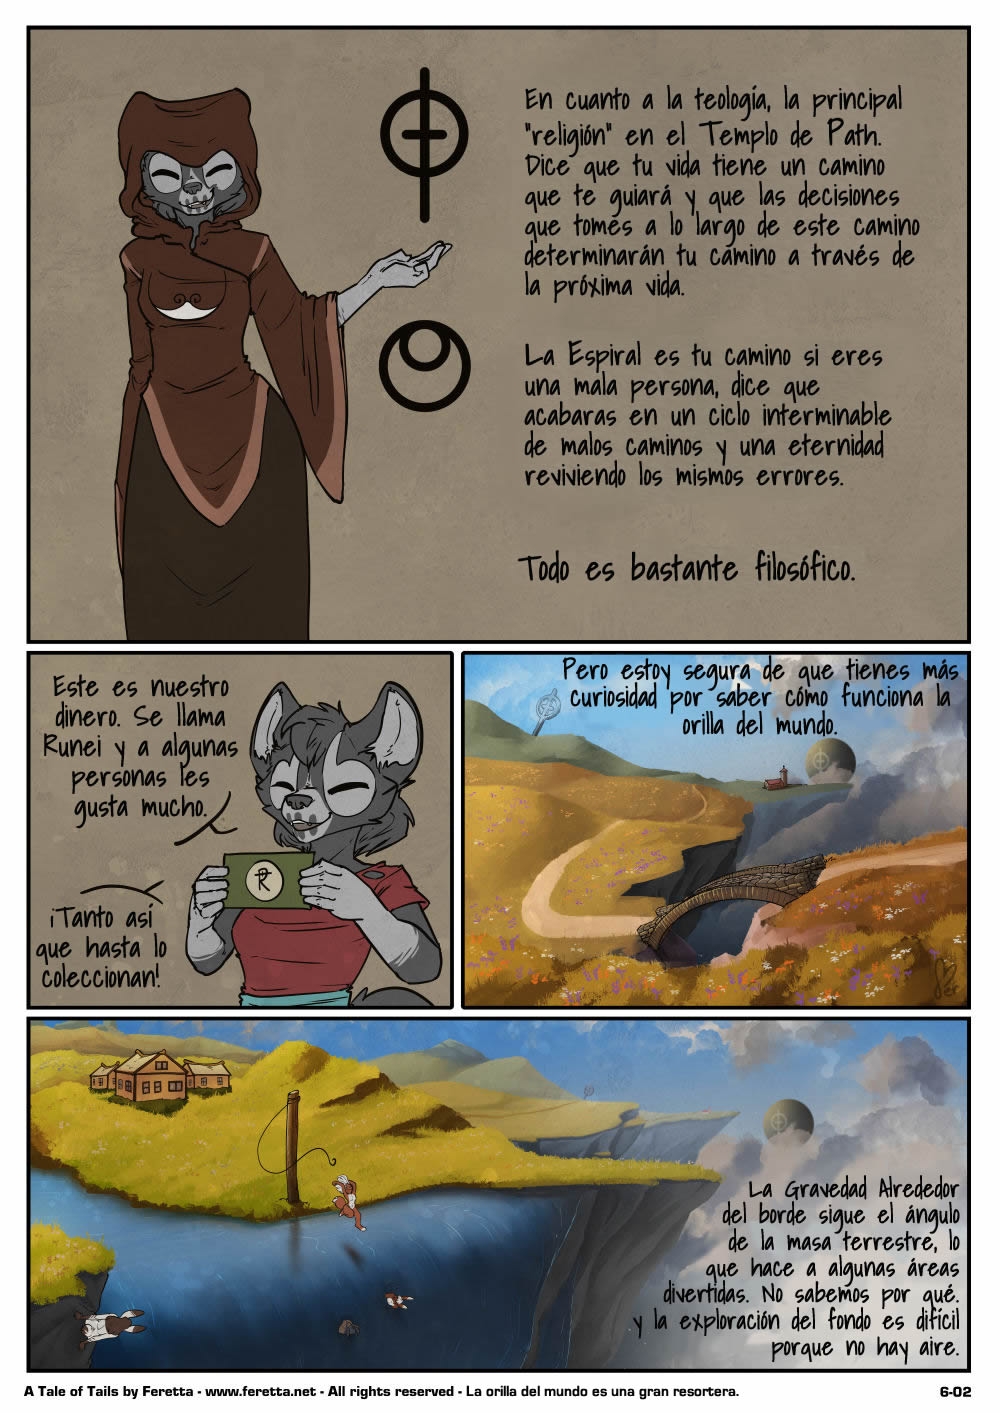 [Feretta] A Tale of Tails: Chapter 6 - Paths converge / Los caminos convergen [Spanish] [Red Fox Makkan] 2